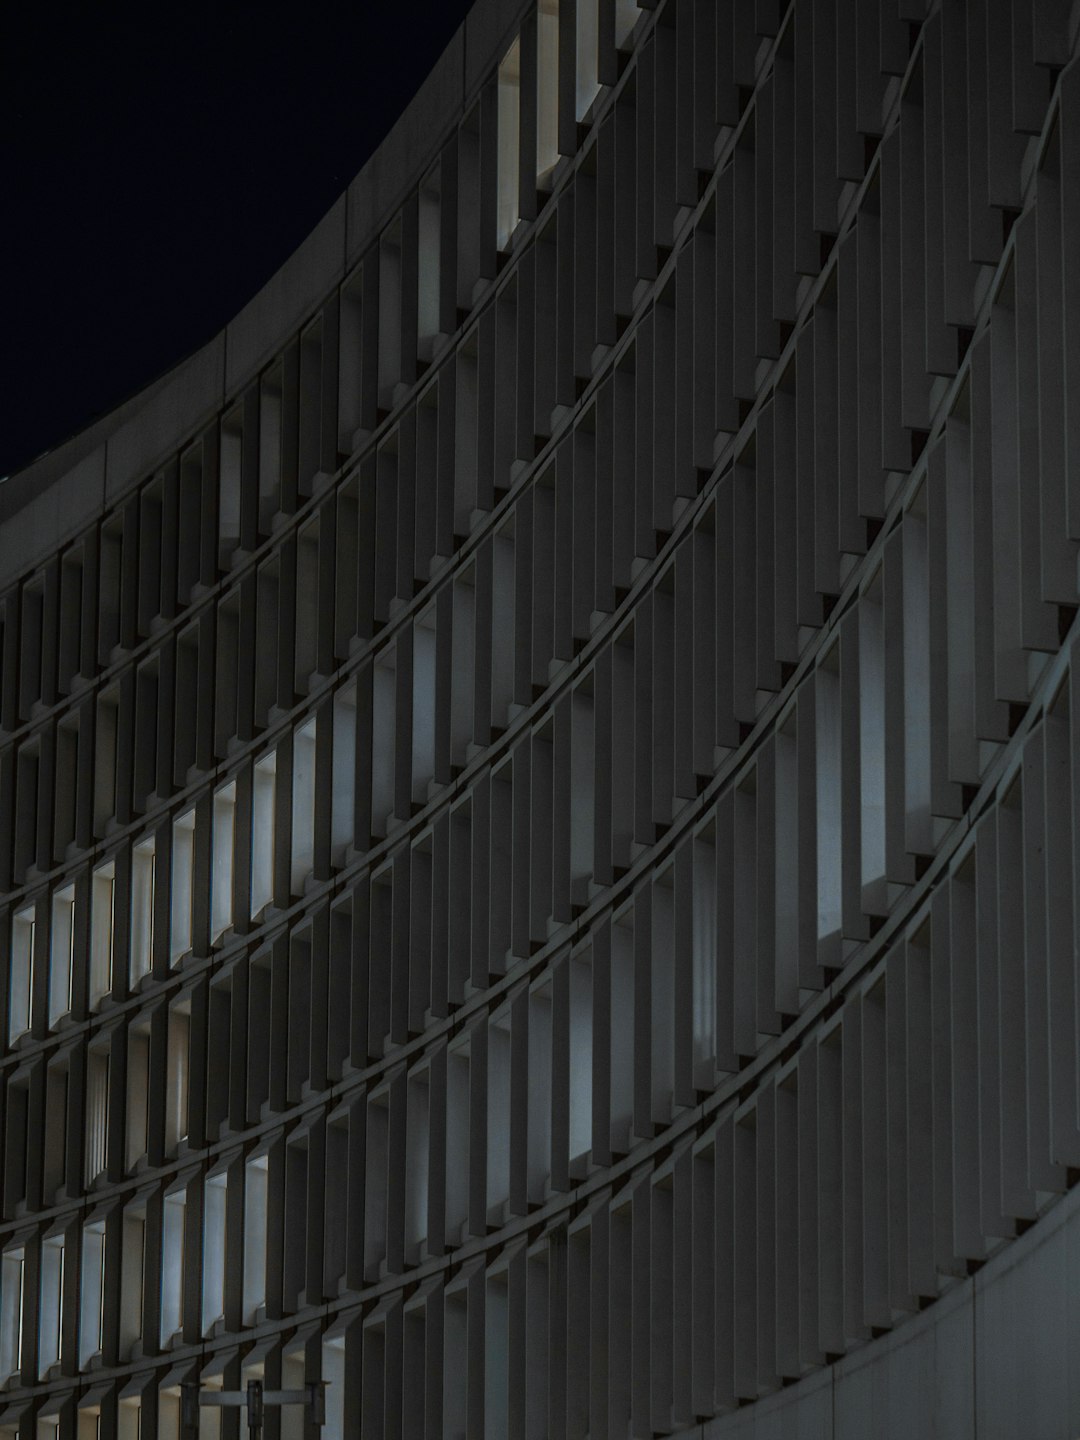 Night photo of the curved facade wall with vertical and horizontal lines on the concrete panels. Soft light illuminates the architectural photography with a building closeup from a low angle shot, cityscape in the background providing an urban atmosphere. The minimalistic style features subtle lighting and a high resolution sharp focus showing depth of field and detailed textures of the architectural details in the style of an architectural masterpiece. –ar 3:4